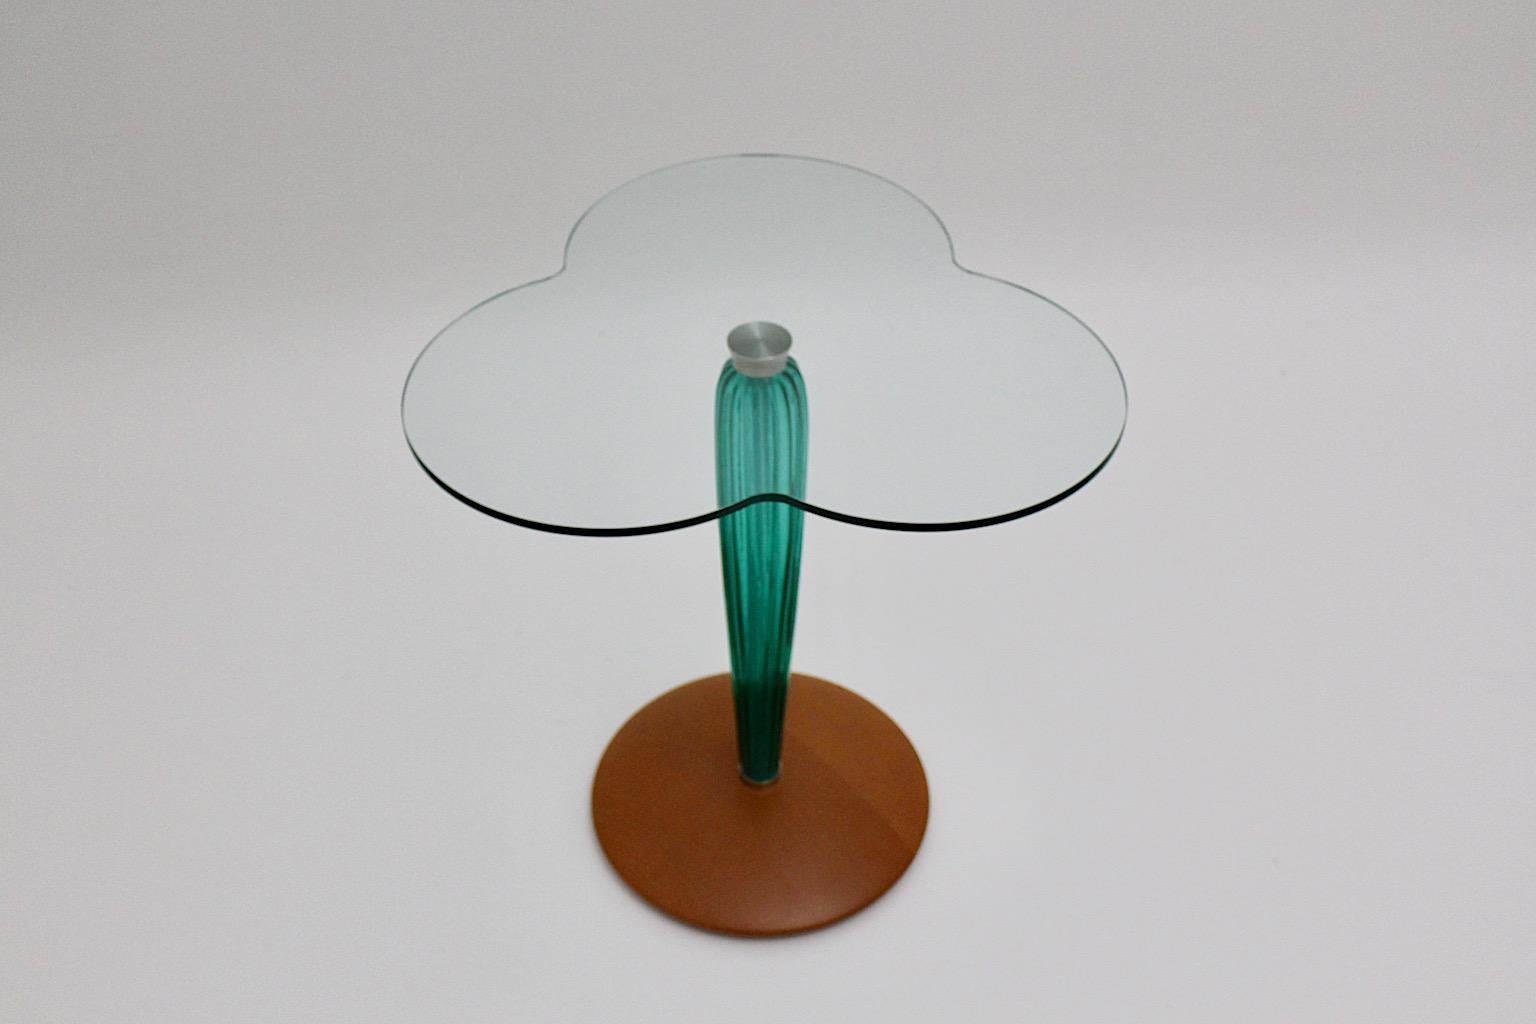 Green and clear glass vintage side table attributed to Seguso designed and executed in Italy circa 1980.
An amazing side table from clear glass, green glass and beech in a nice cloverleaf shape. The round disc-shaped foot base from beech shows a